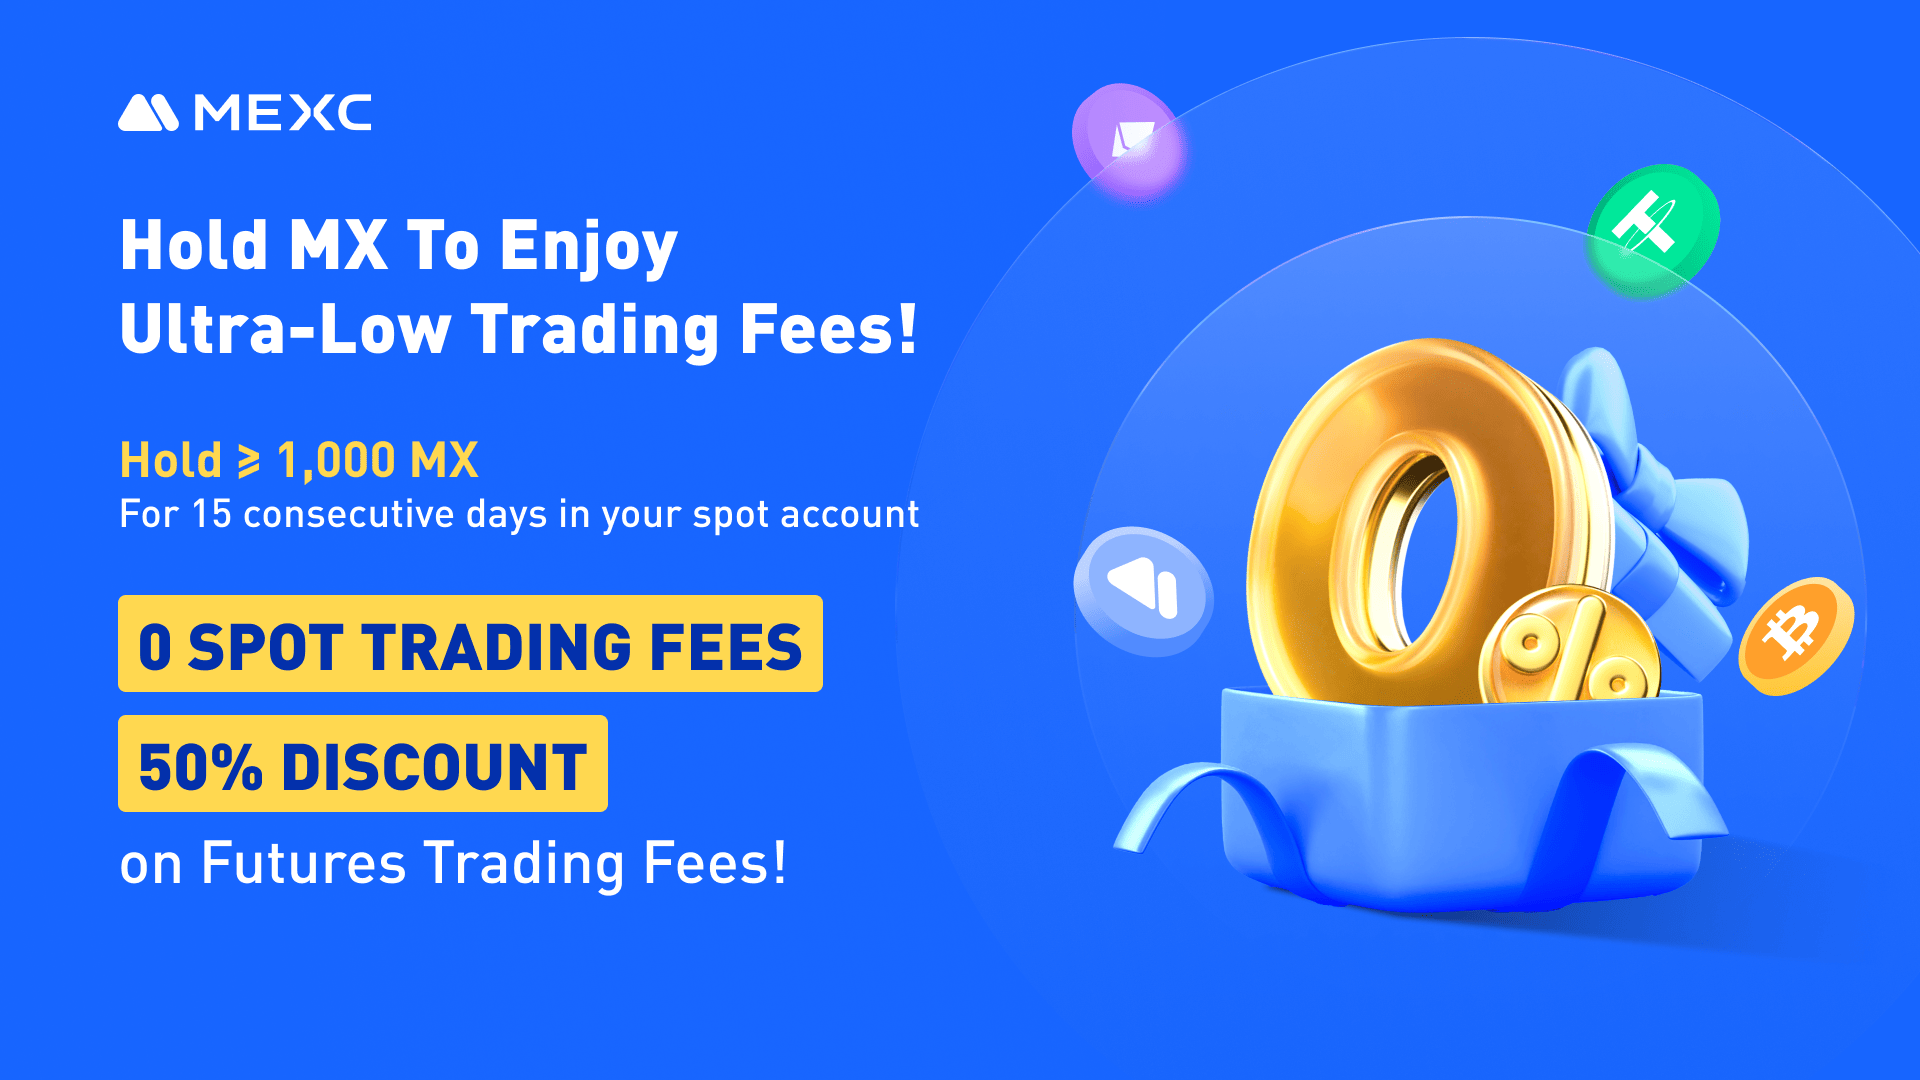 Buy Top MEME Coins at MEXC With The Lowest Fees!